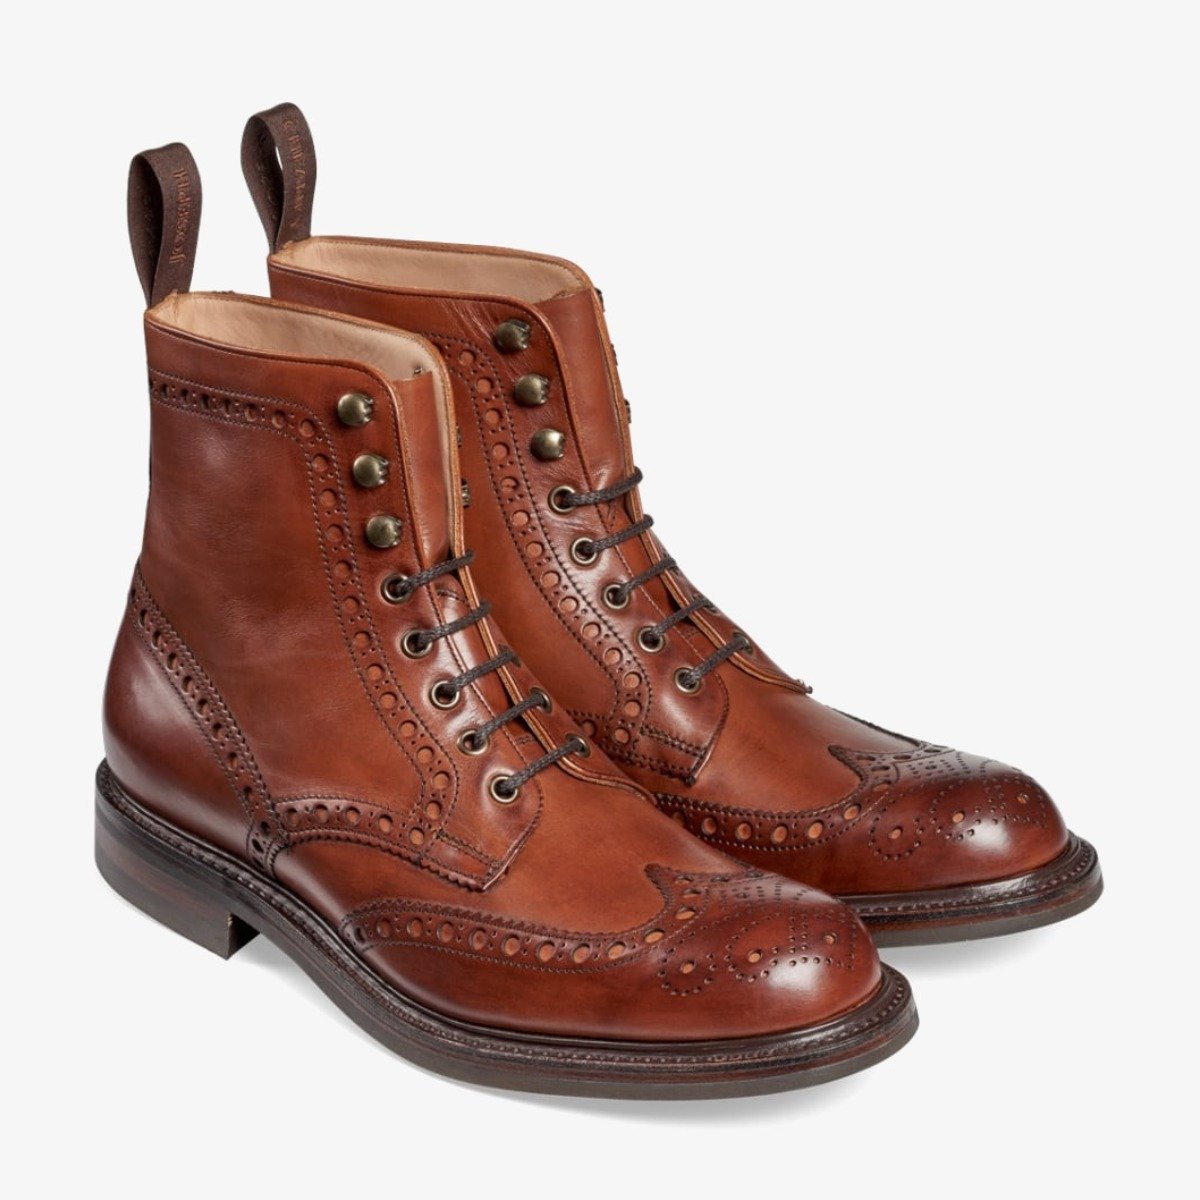 Cheaney Tweed dark leaf brogue men's lace-up boots